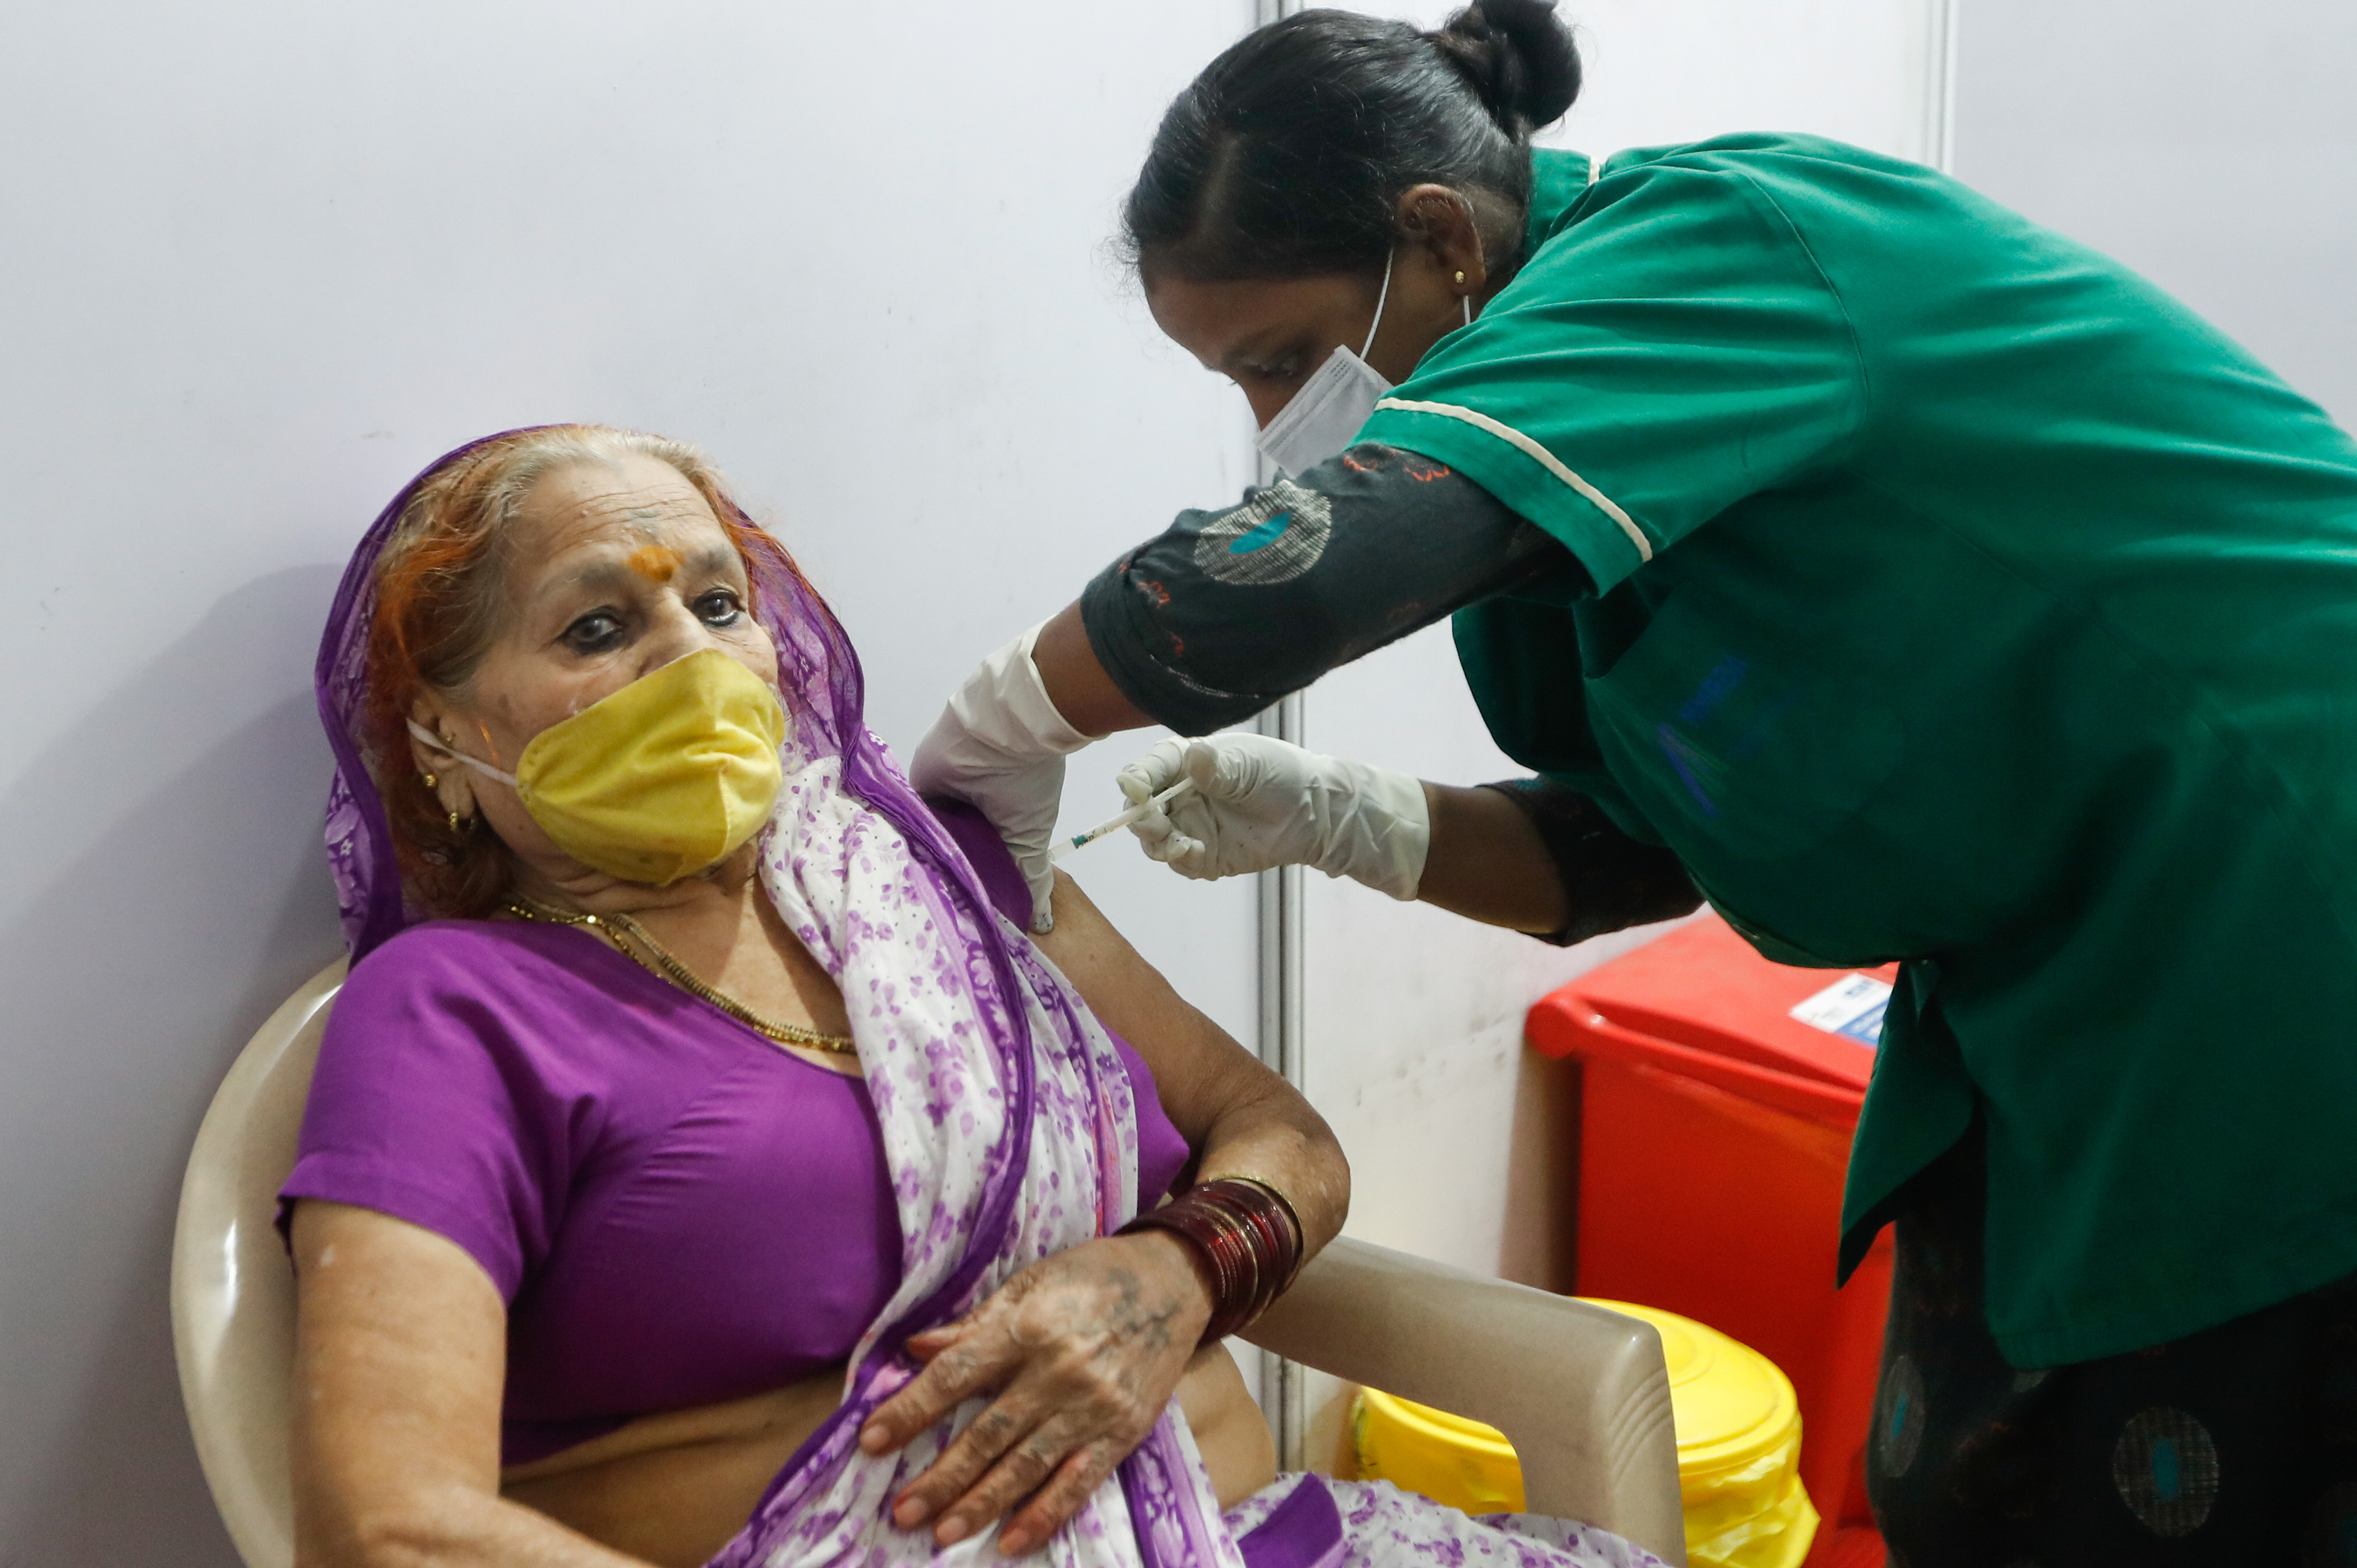 A woman reacts as she receives a dose of COVISHIELD, a COVID-19 vaccine manufactured by Serum Institute of India, in Mumbai